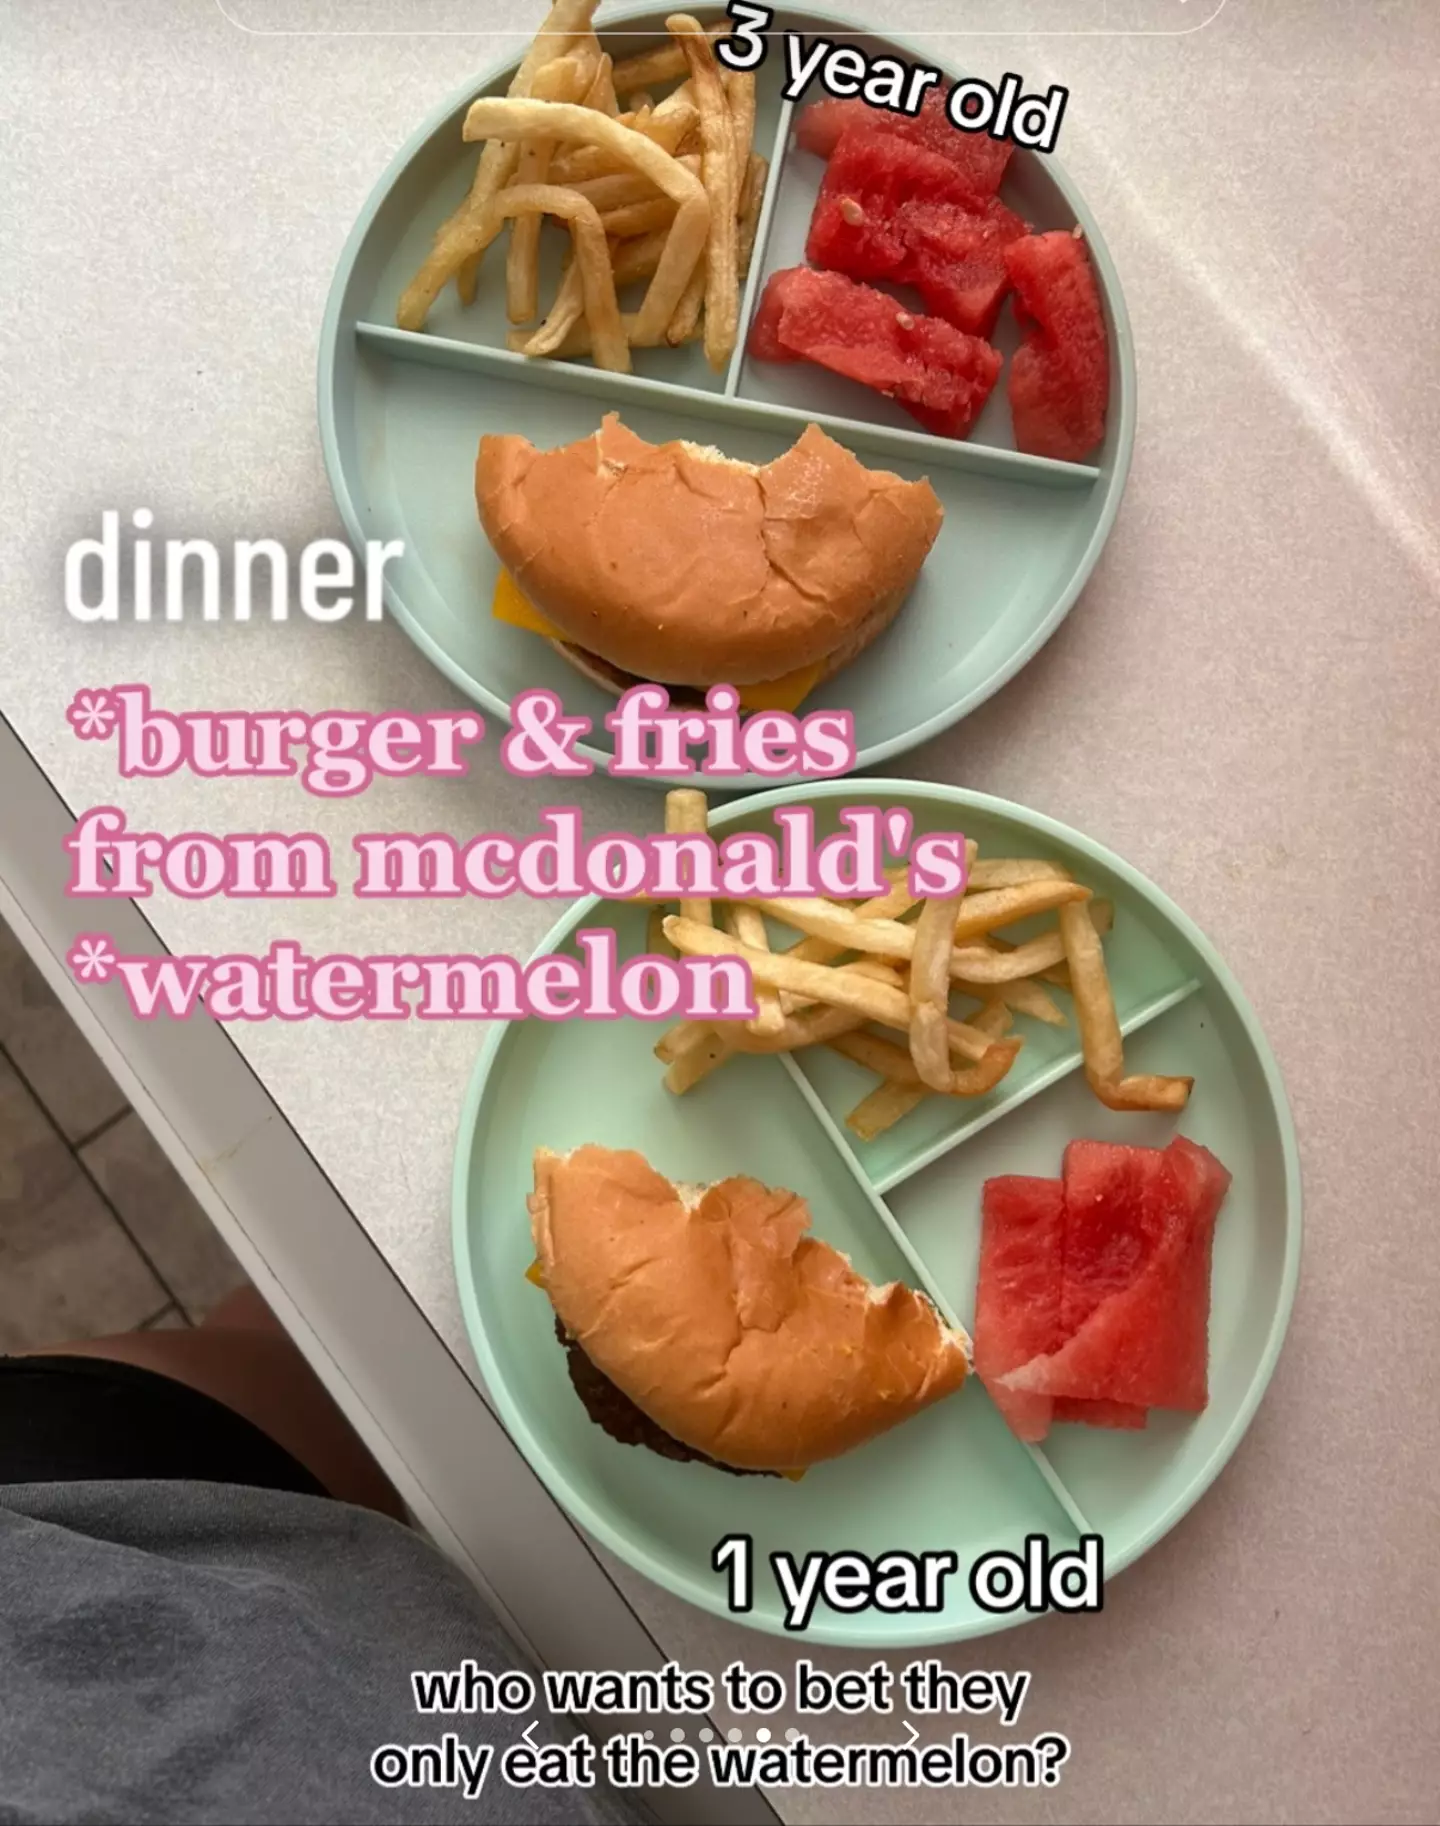 The kids were given half a burger each with fries and some watermelon for dinner.